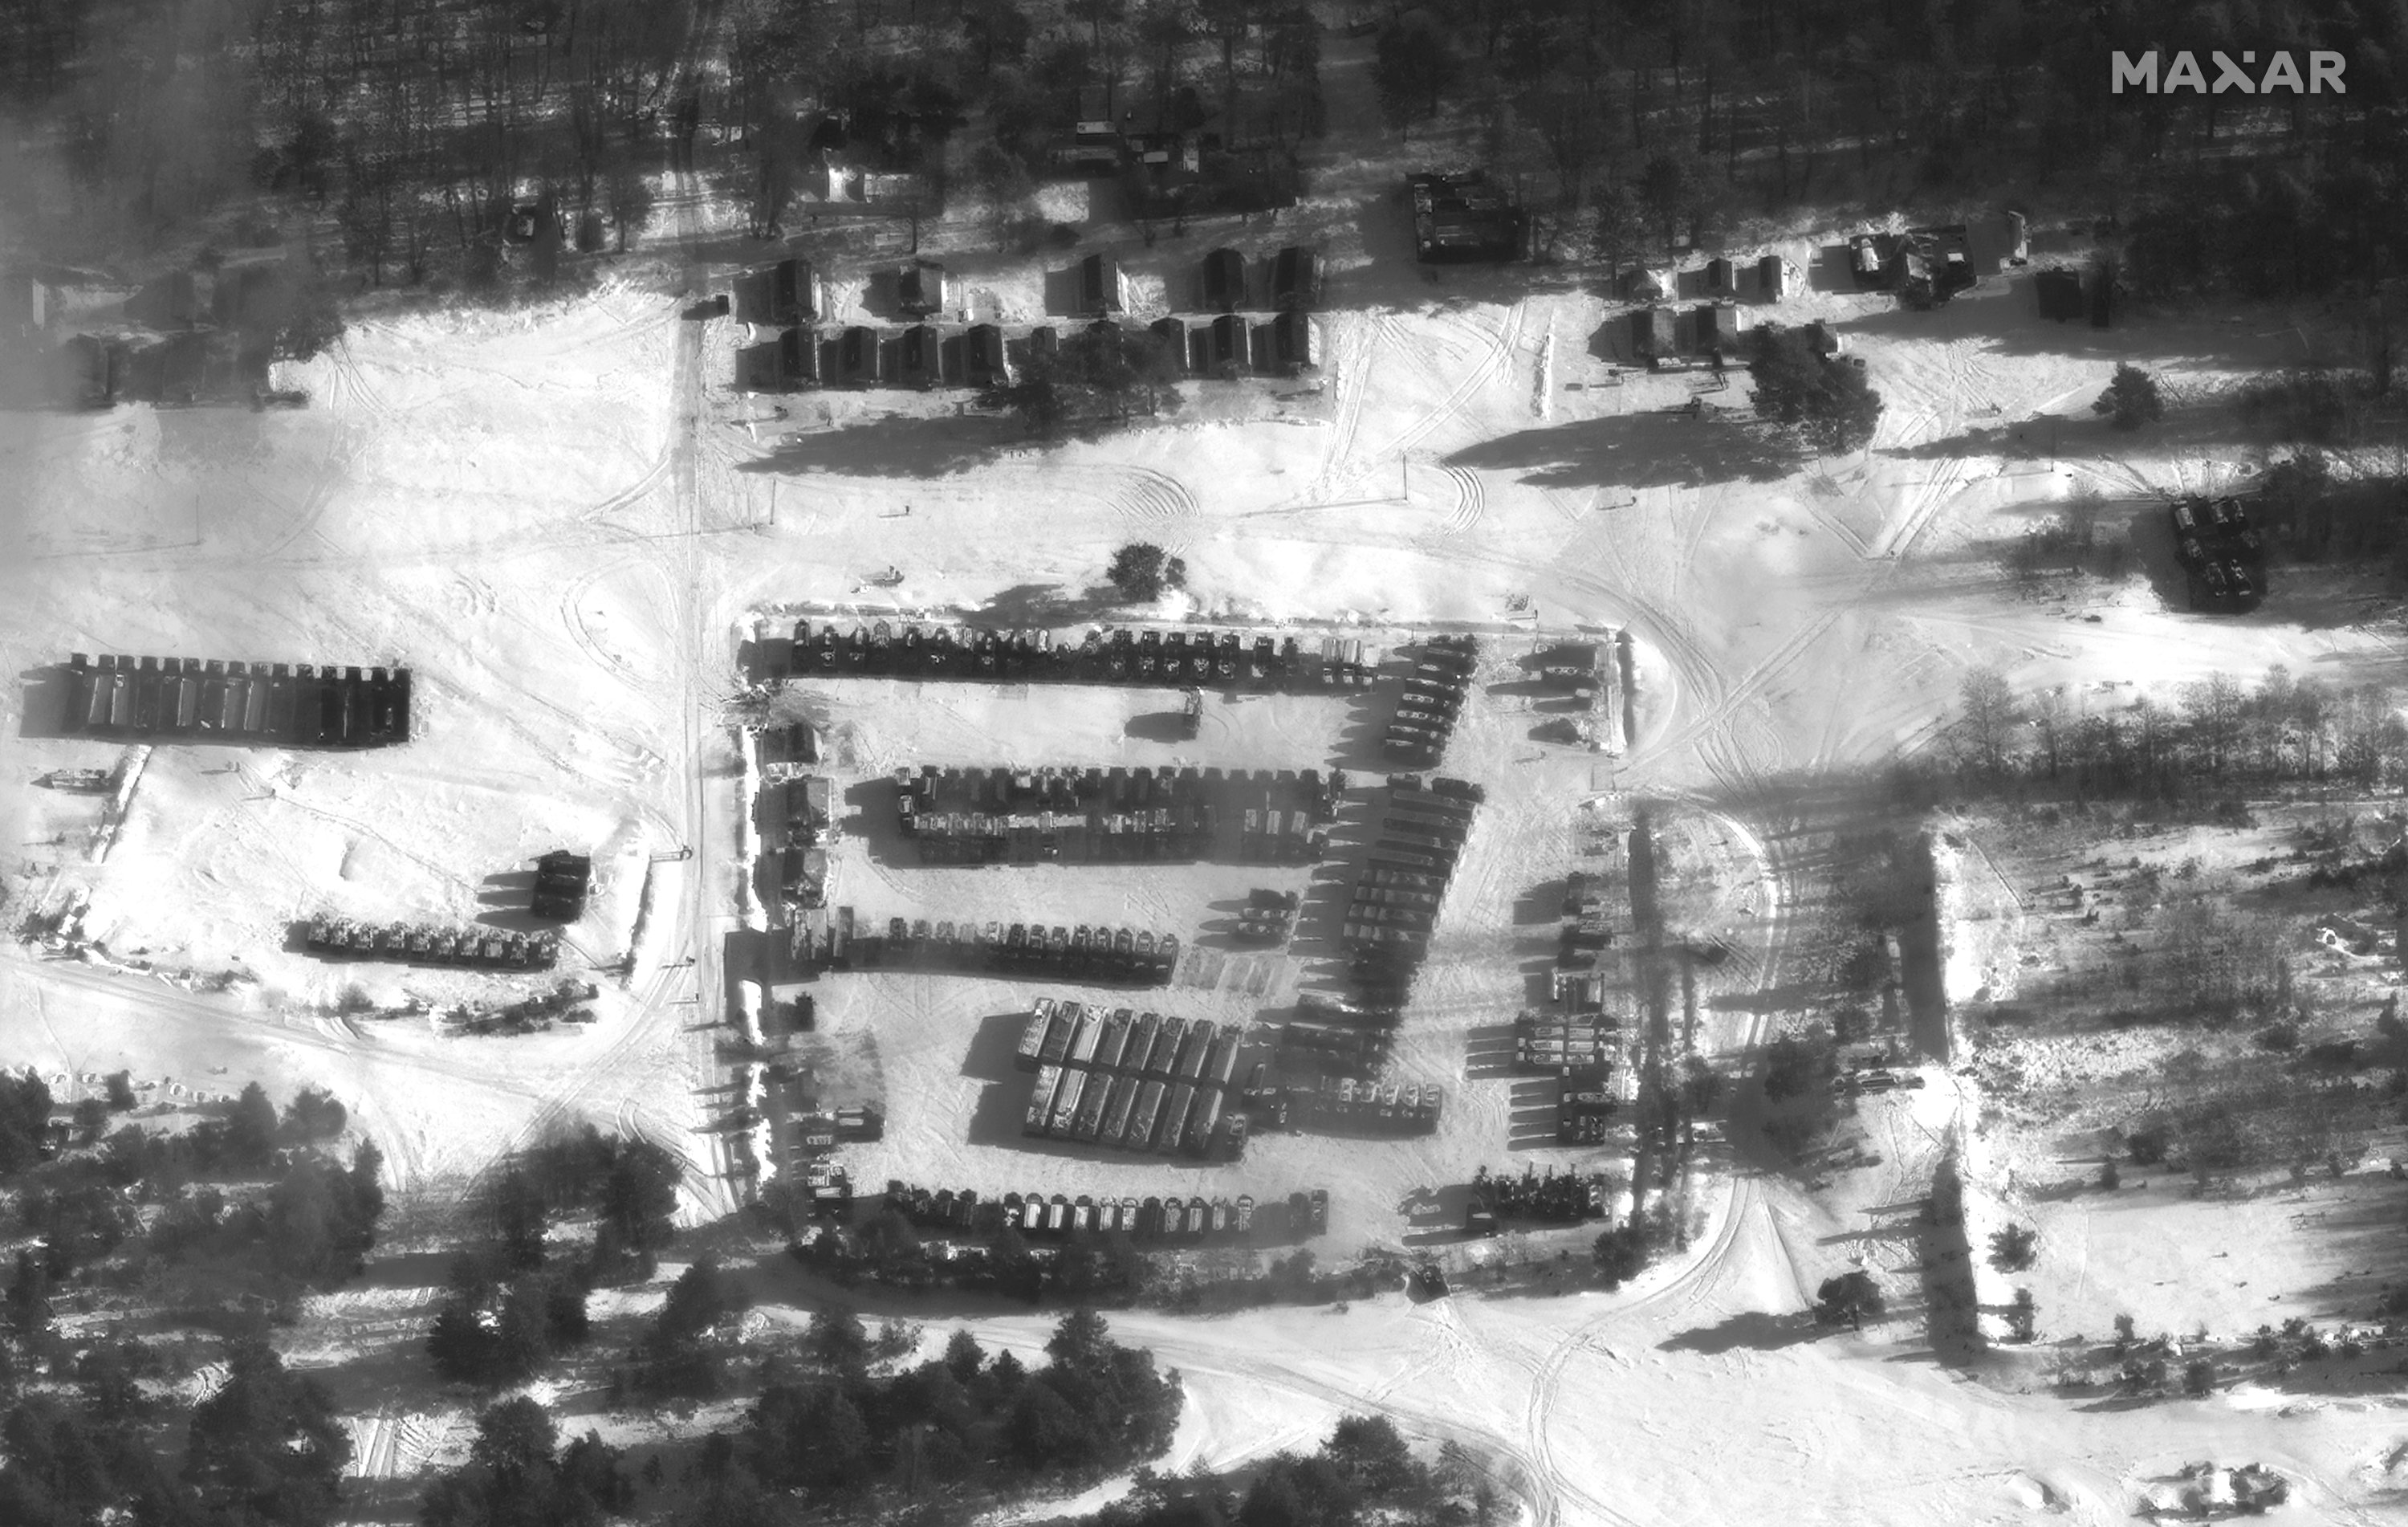 This satellite image provided by Maxar Technologies shows SS26 Iskander missiles gathered in the Osipovichi training area, at Brestsky, Belarus, Jan. 30, 2022. (Maxar Technologies via AP)